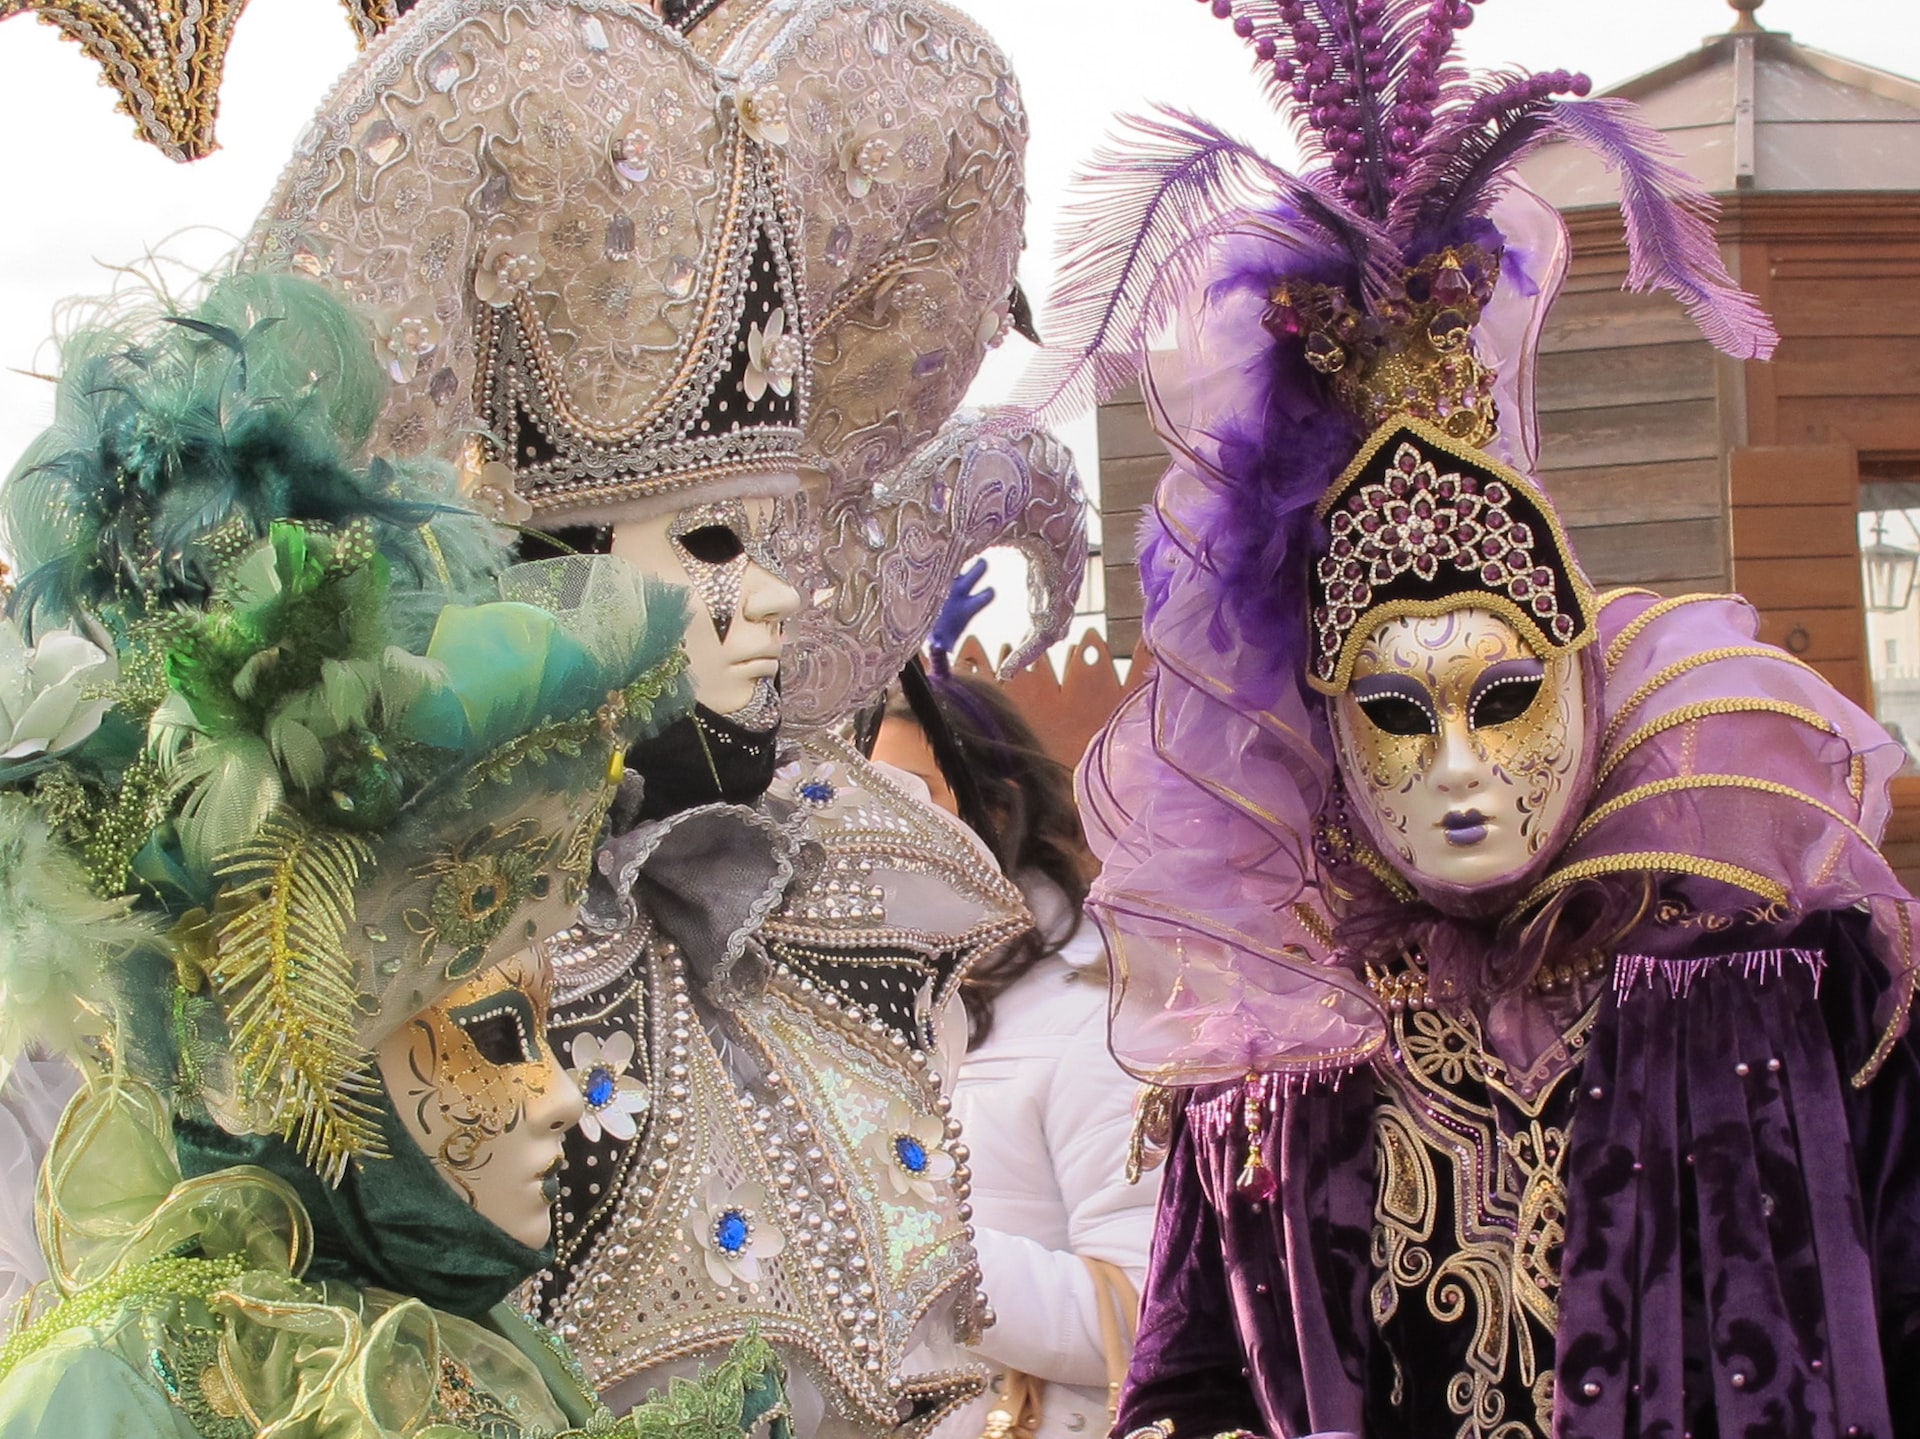 Three people in various colored outfits and masks for Mardi Gras.